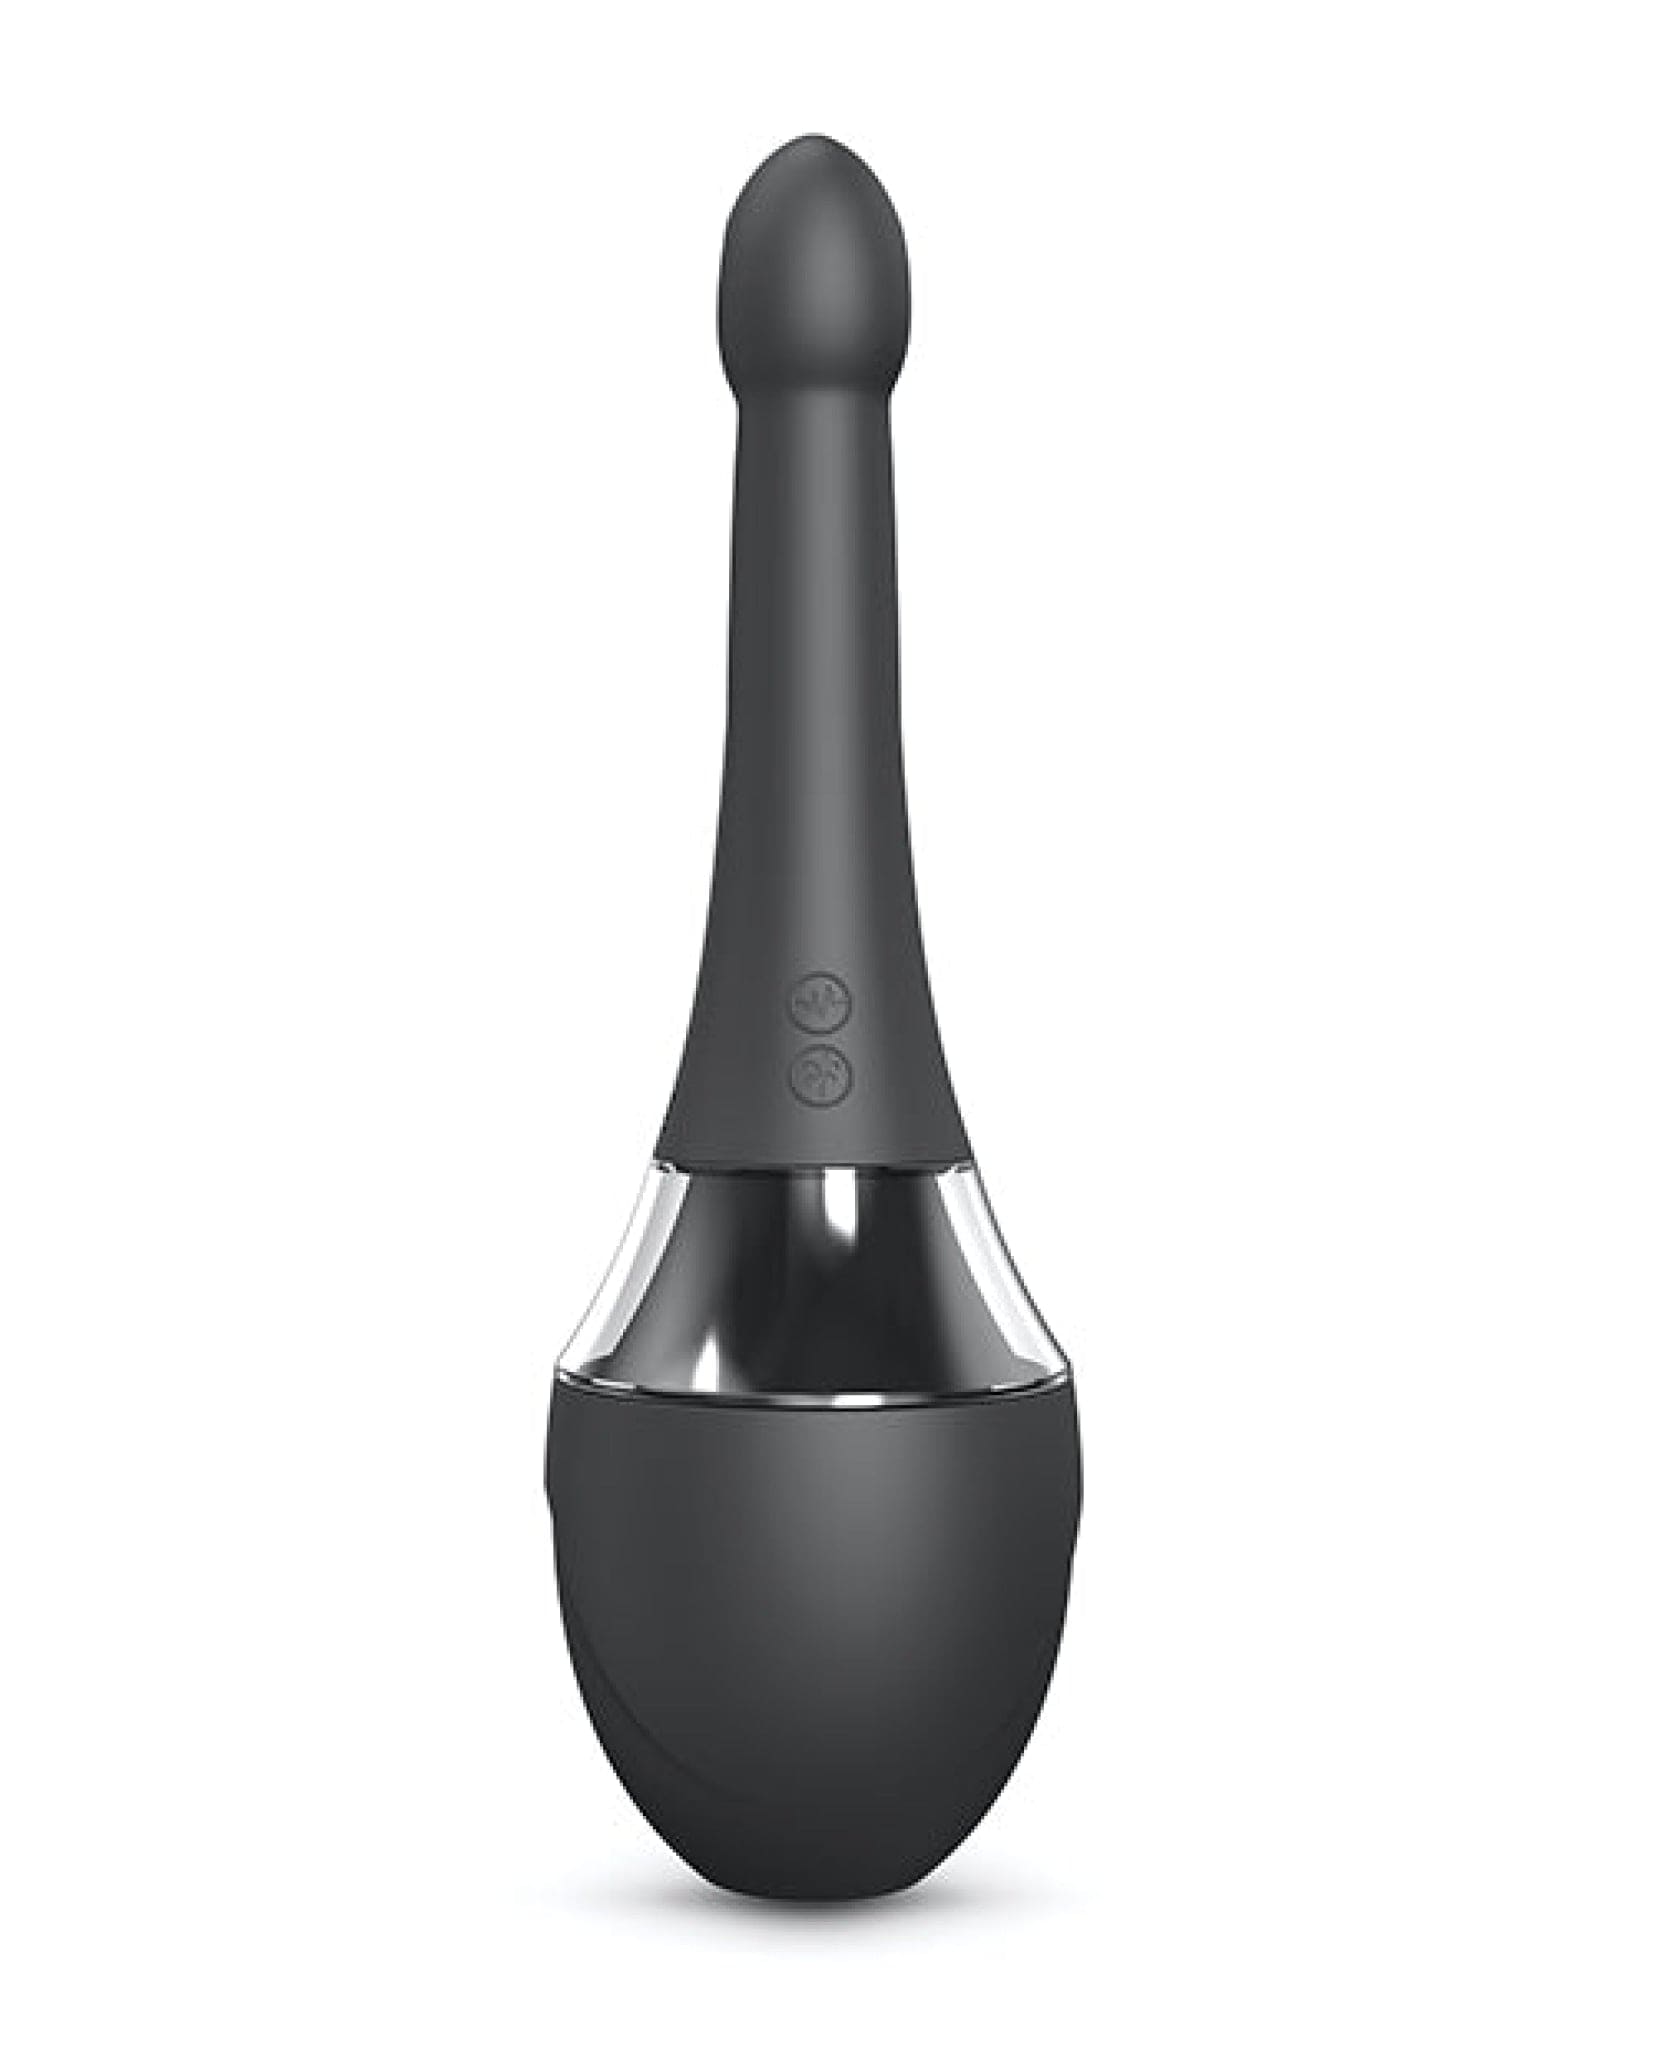 Doll Authority Anal Products Dorcel Vibrating Douche Mate Pro - Black-silver